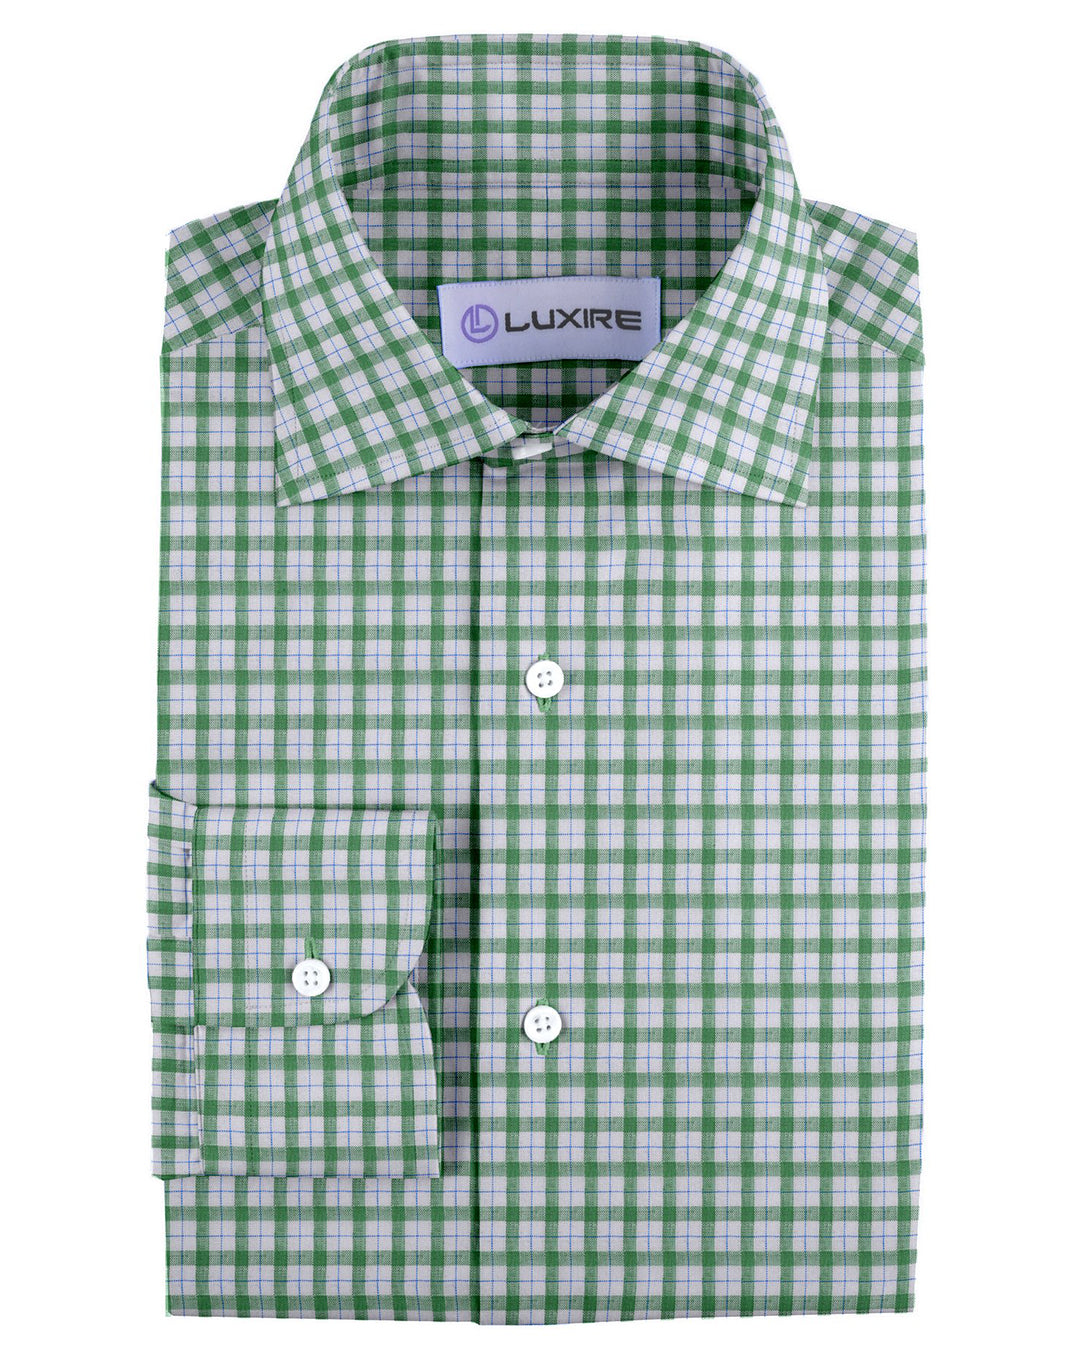 Front of the custom linen shirt for men in green and blue checks on white by Luxire Clothing